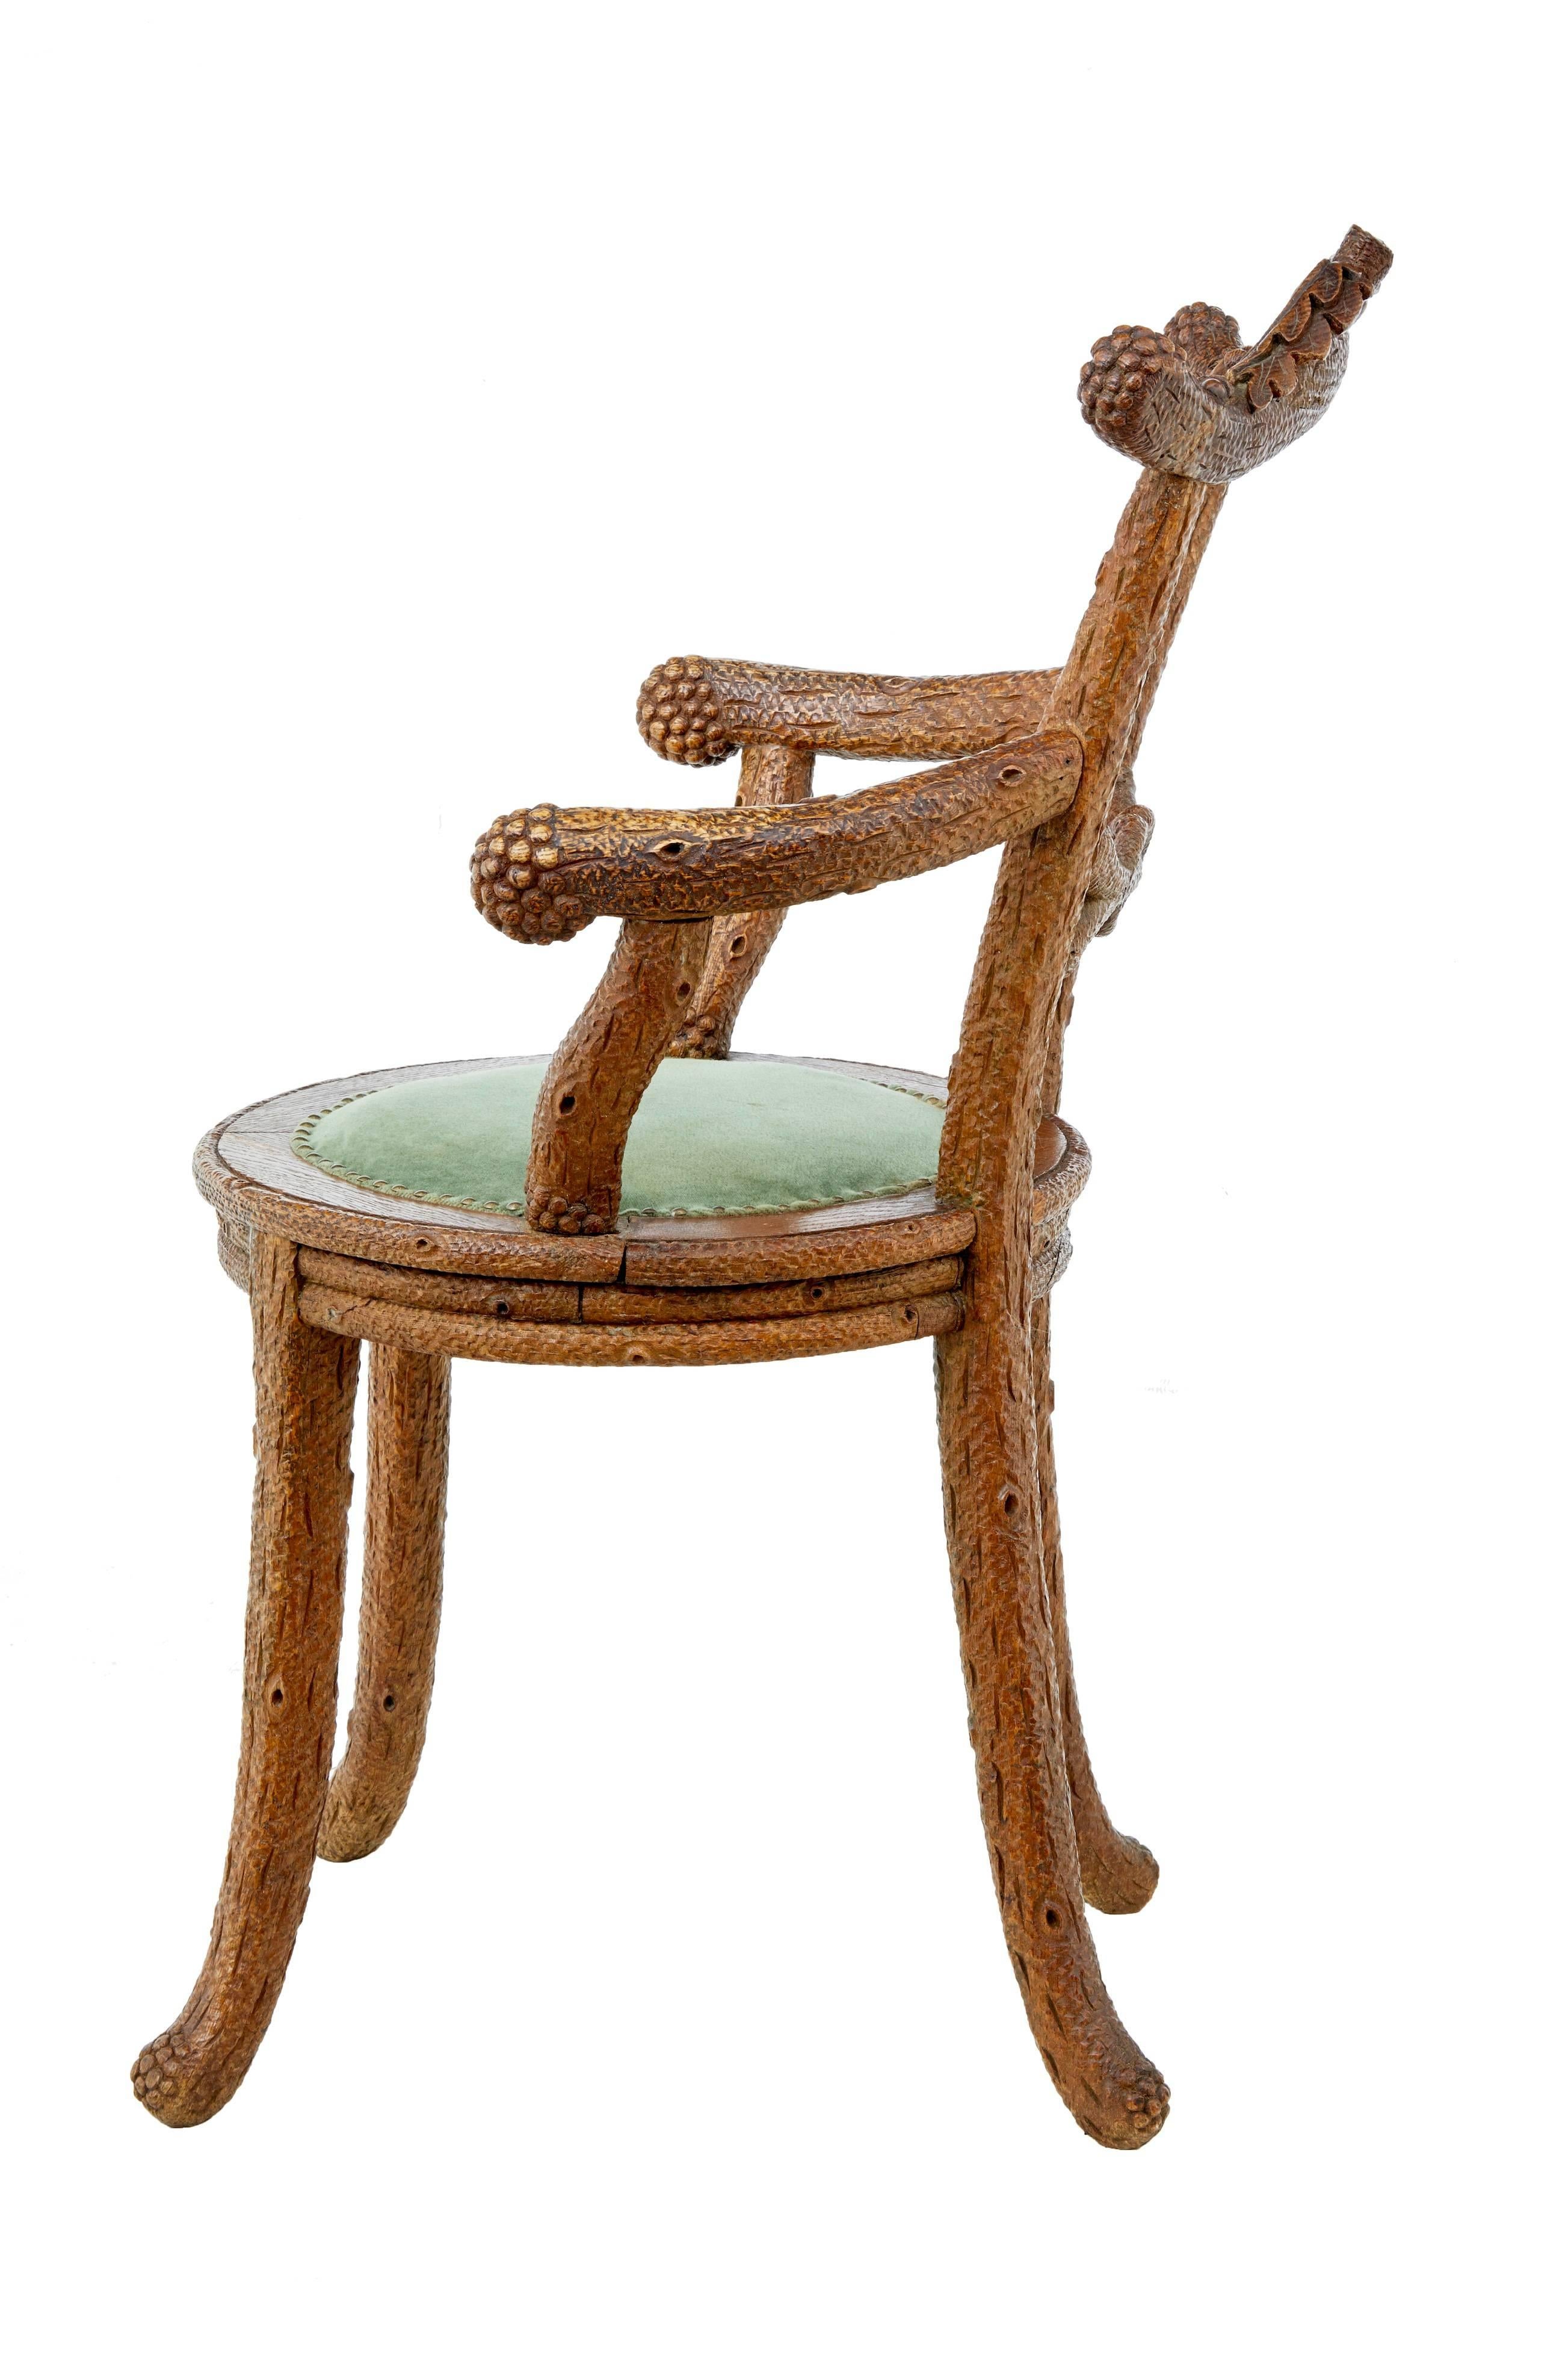 Good quality Black Forest carved oak armchair, circa 1880.
Profusely carved in oak to simulate tree bark, decorated with carved acorns.
Small padded seat.

Areas of restoration to woodwork.
Measures: Height 35 1/2